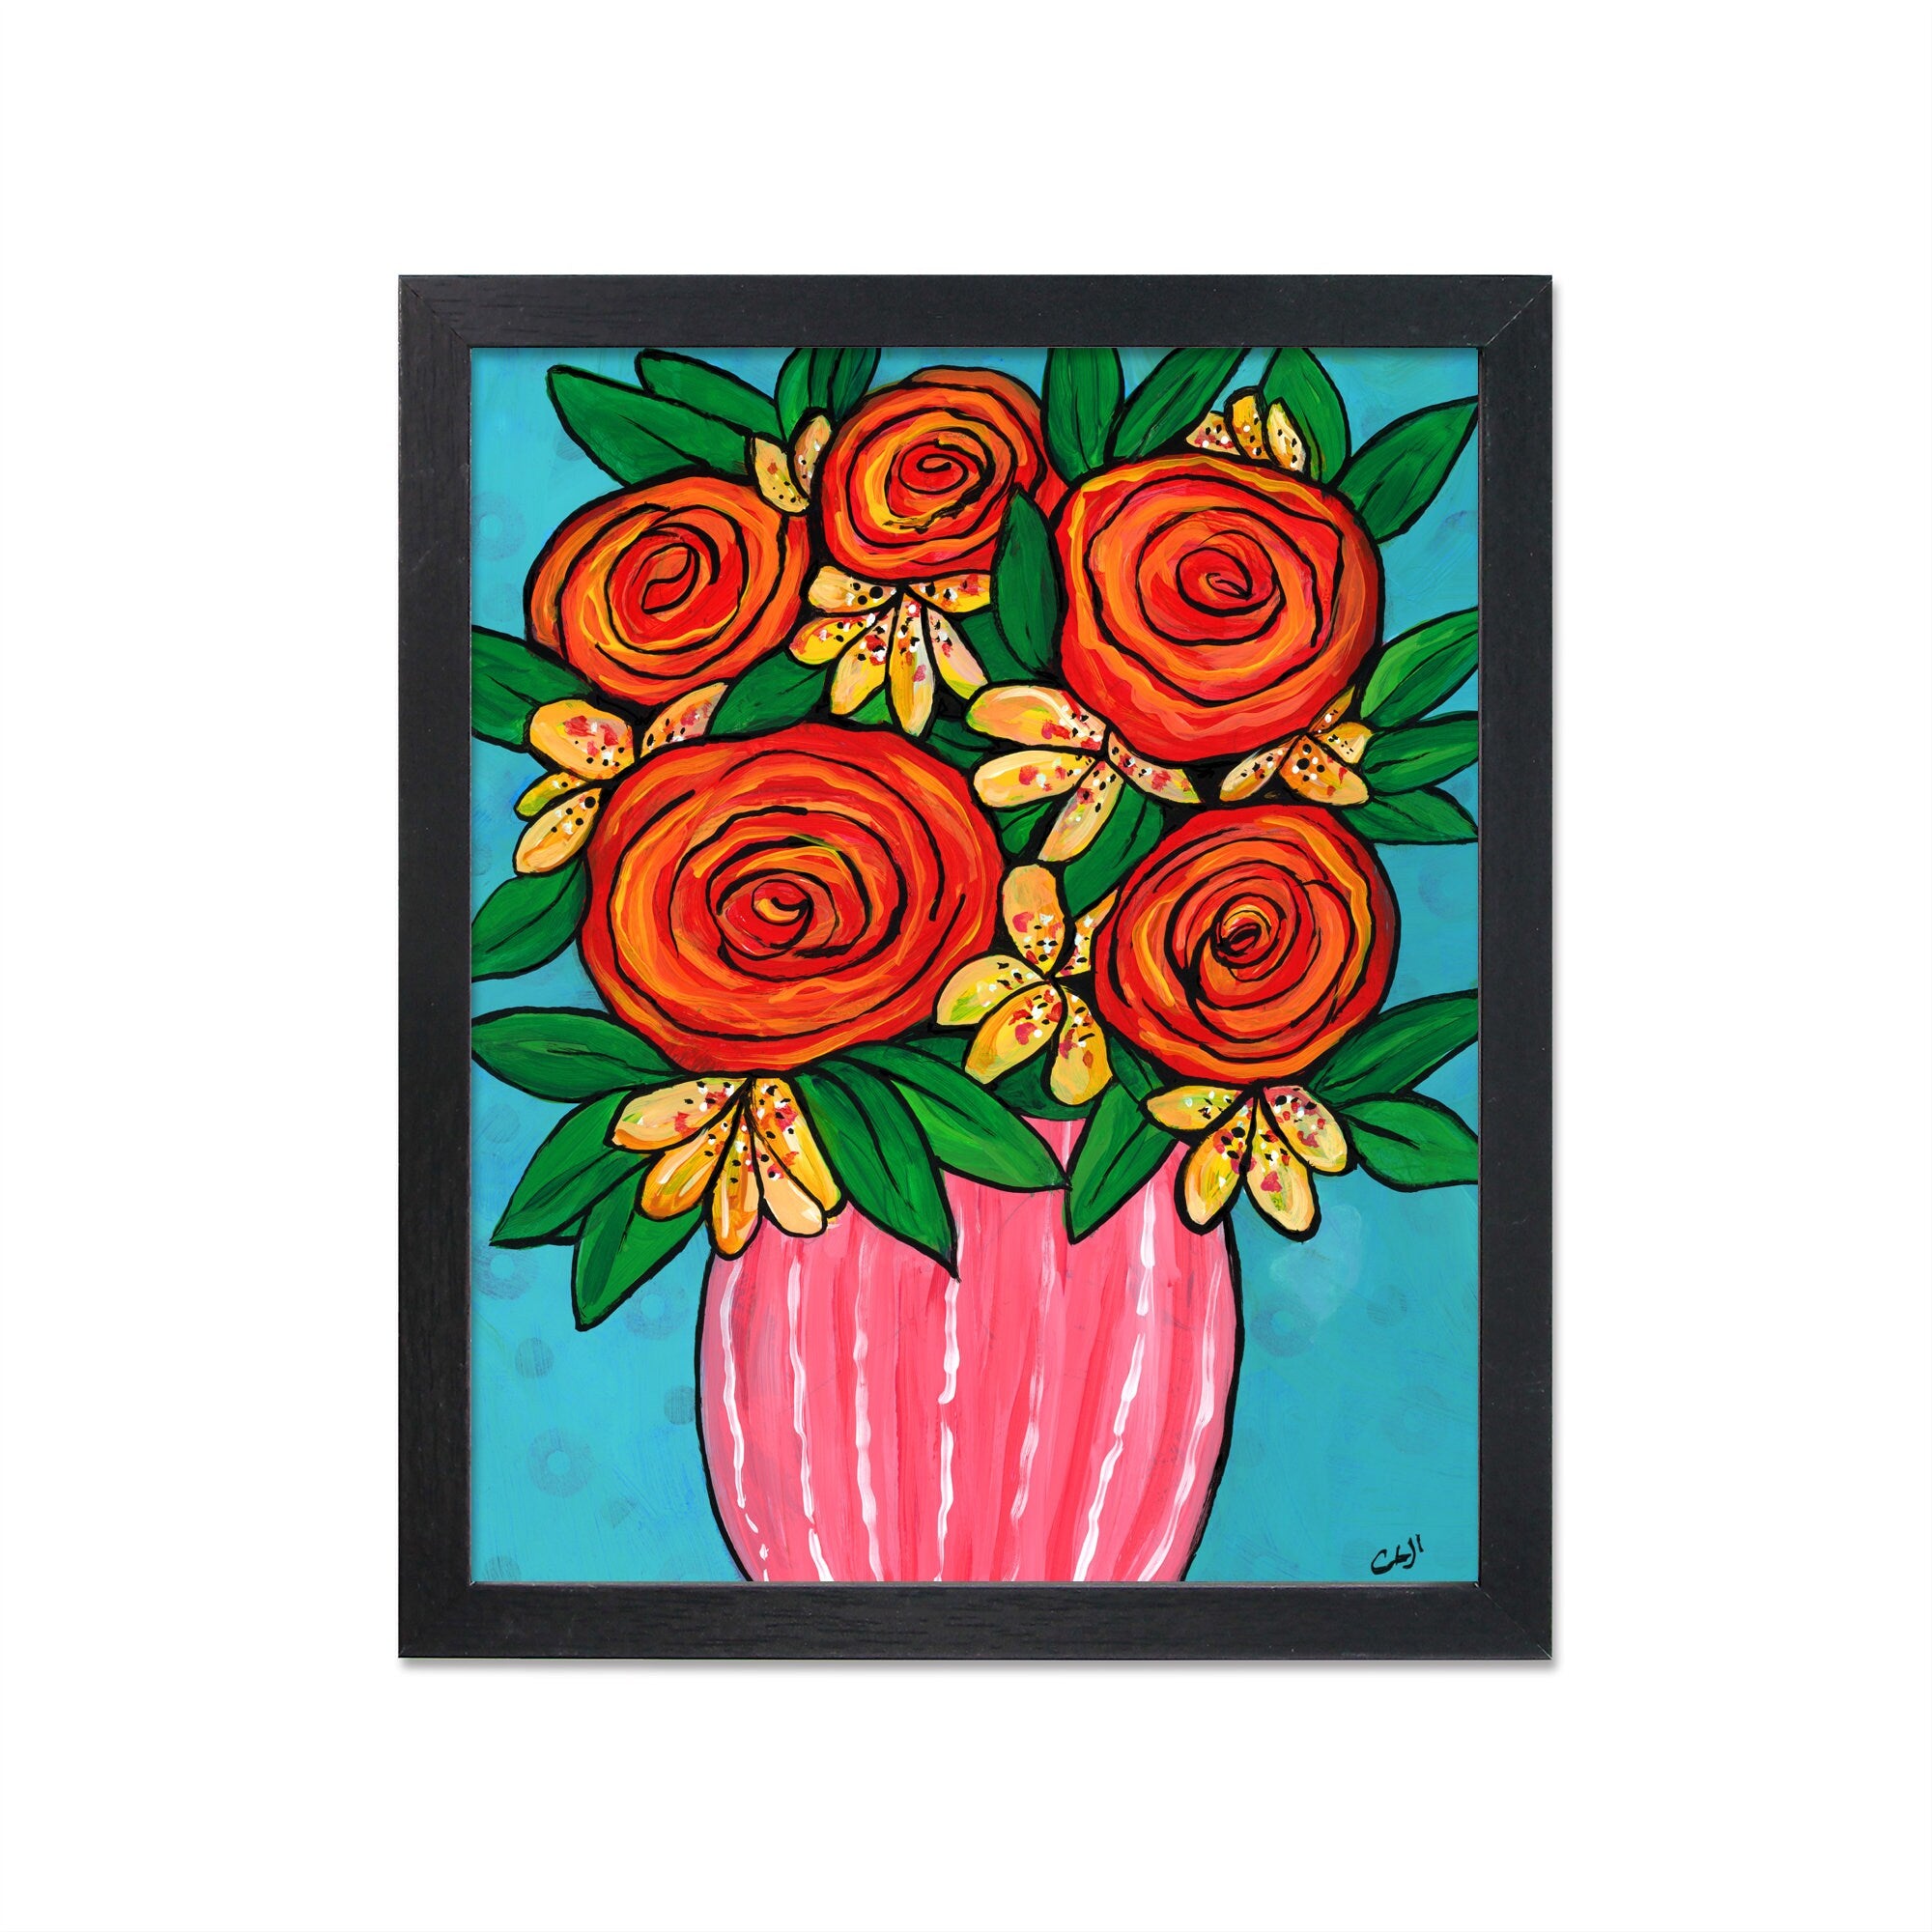 Roses and Lillies Art Print - Colorful Flower Still Life Giclée - Floral Giclee - 8 x 10 inches with Optional Black Mat by Claudine Intner